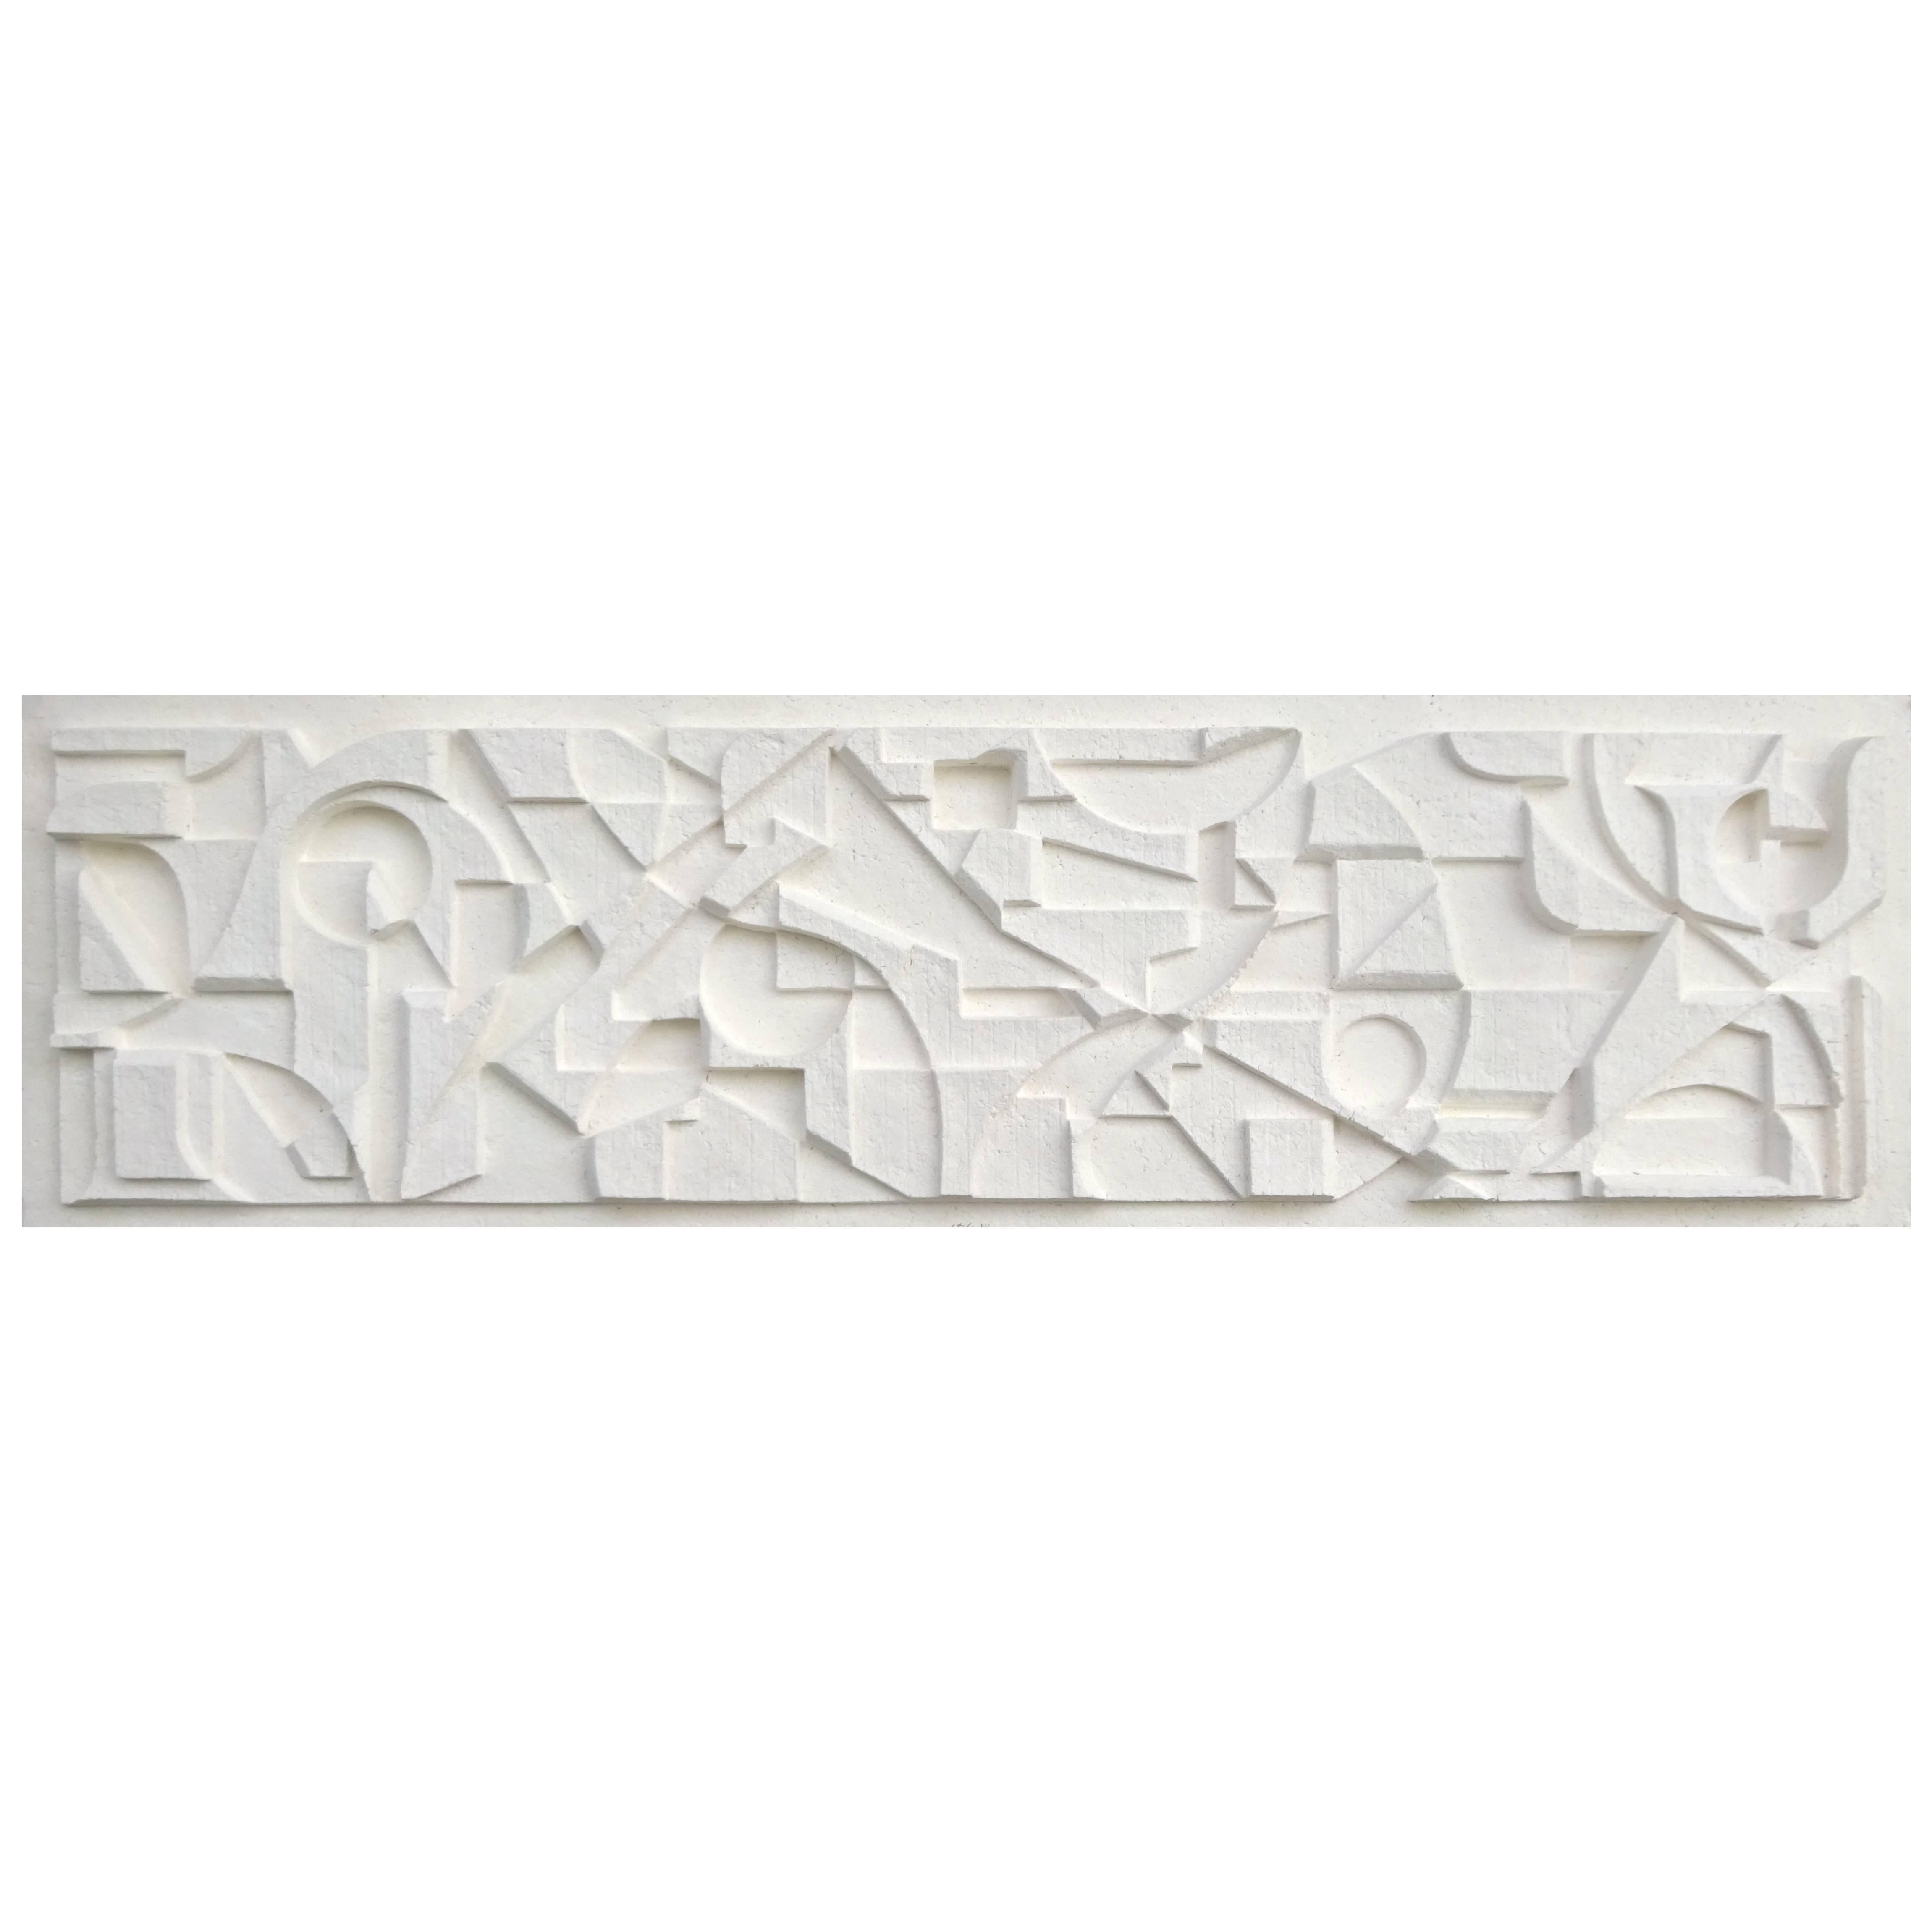 Large Abstract Cast Paper Relief Sculpture, Robert Sanabria, 1982